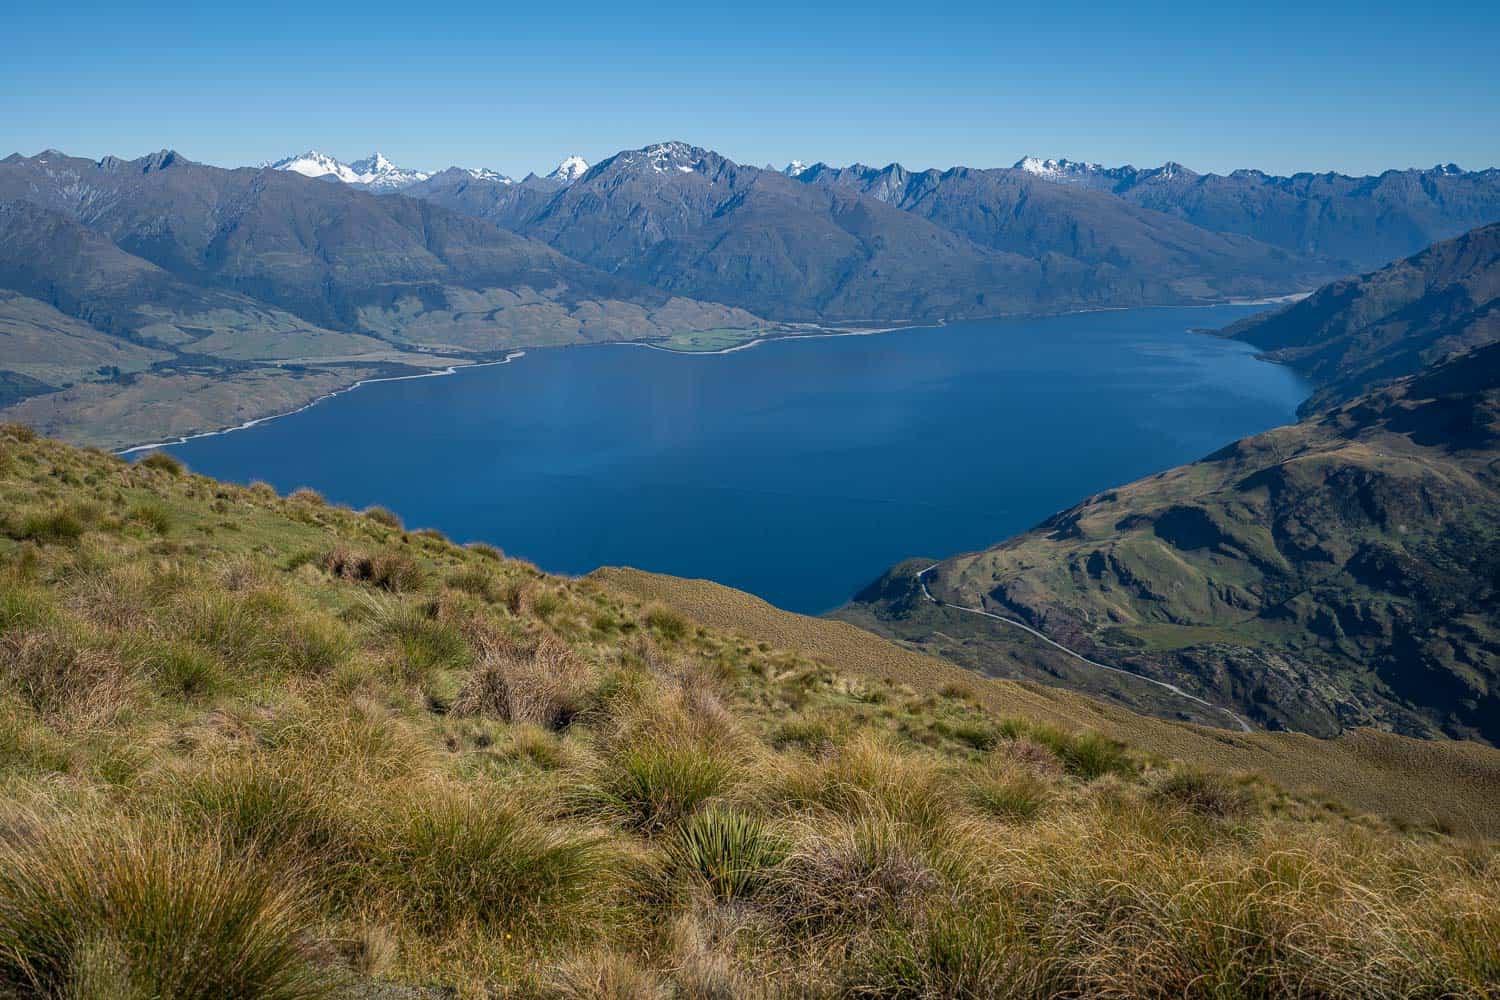 The view from the summit of the Isthmus Peak Track overlooking Lake Wanaka